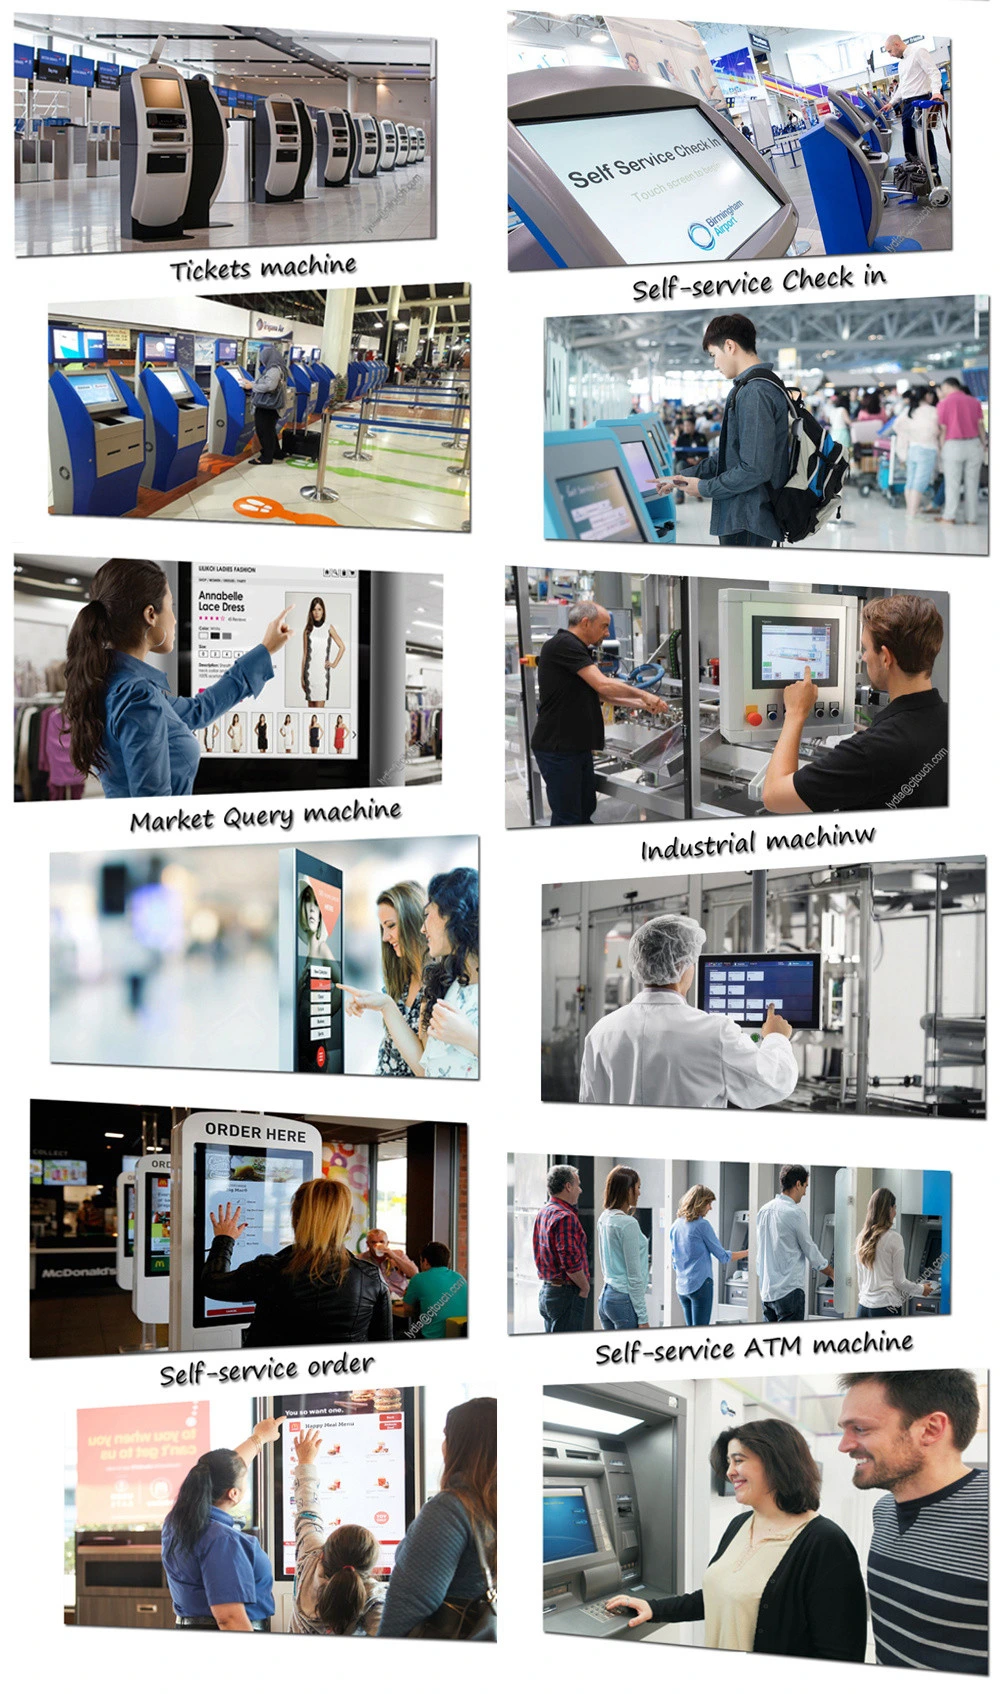 Manufacturers Suppliers LED IR Touch Frame 19inch POS Self-Service Kiosk Touchscreen Resistive Glass Panels